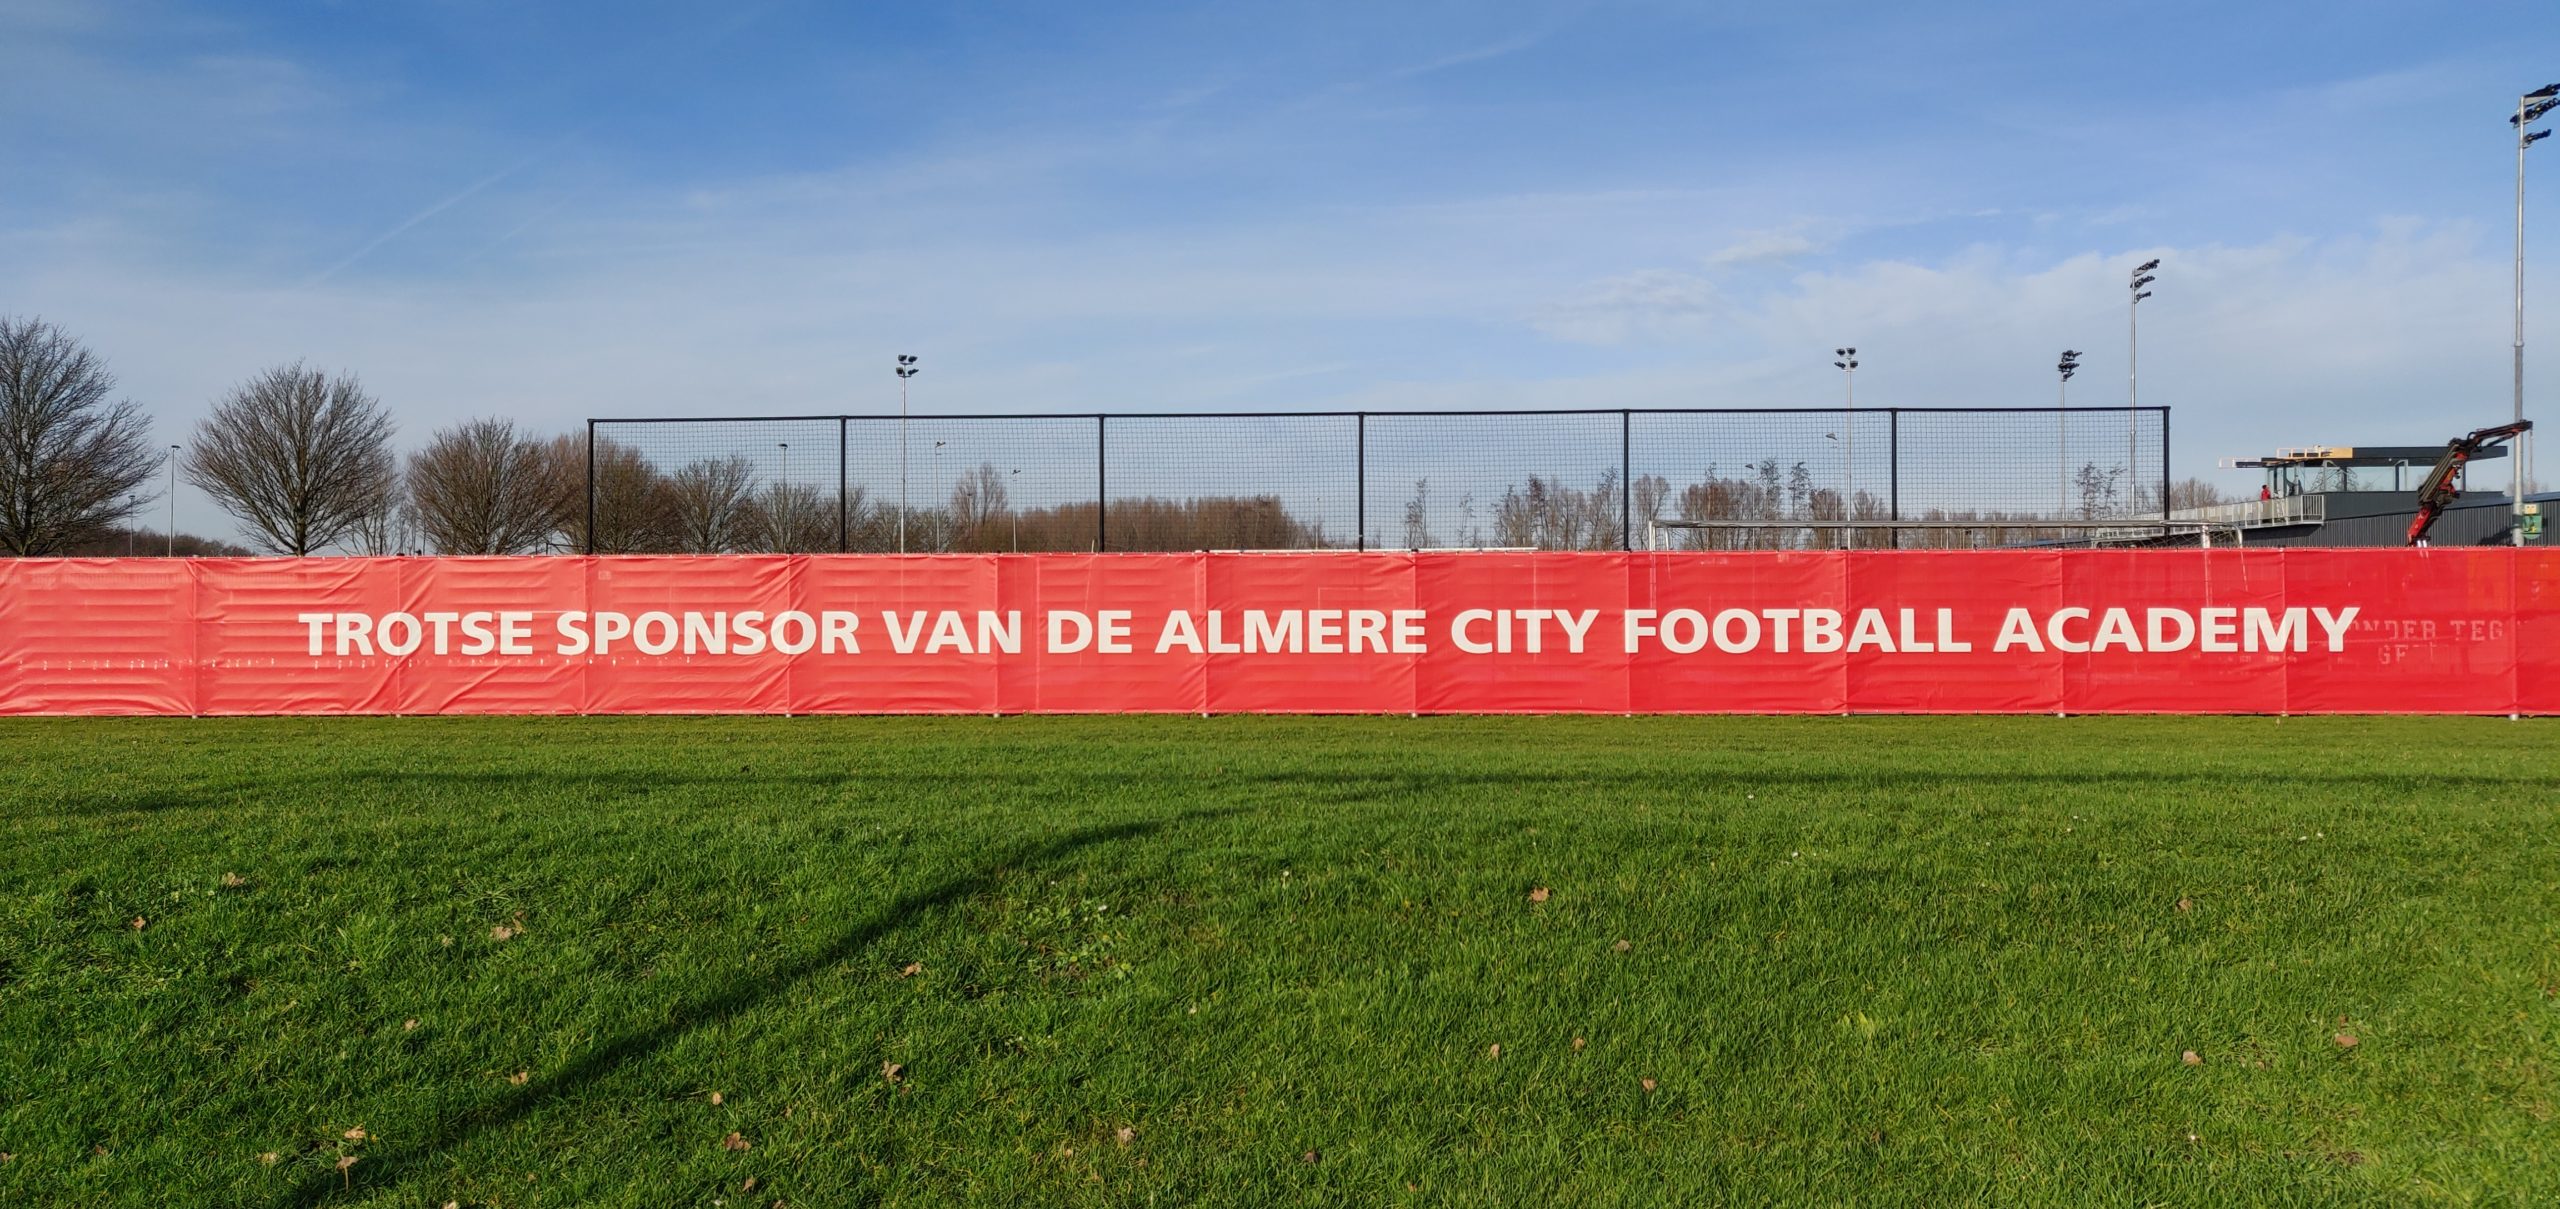 Almere City O21 walst over DWS heen